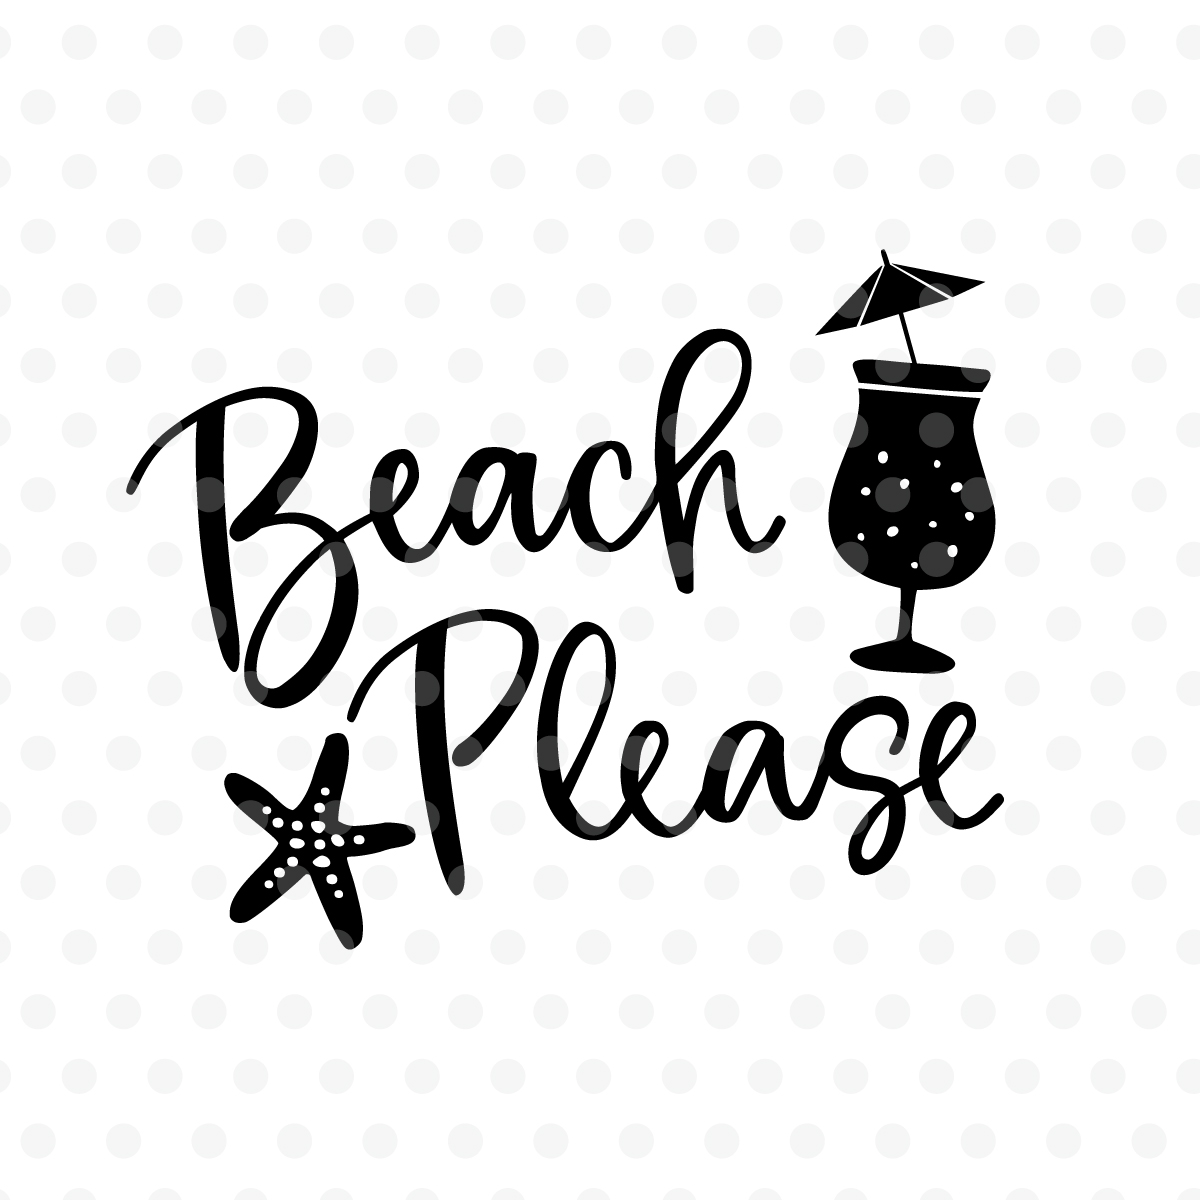 Download Beach Please SVG, EPS, PNG, DXF (102576) | SVGs | Design ...